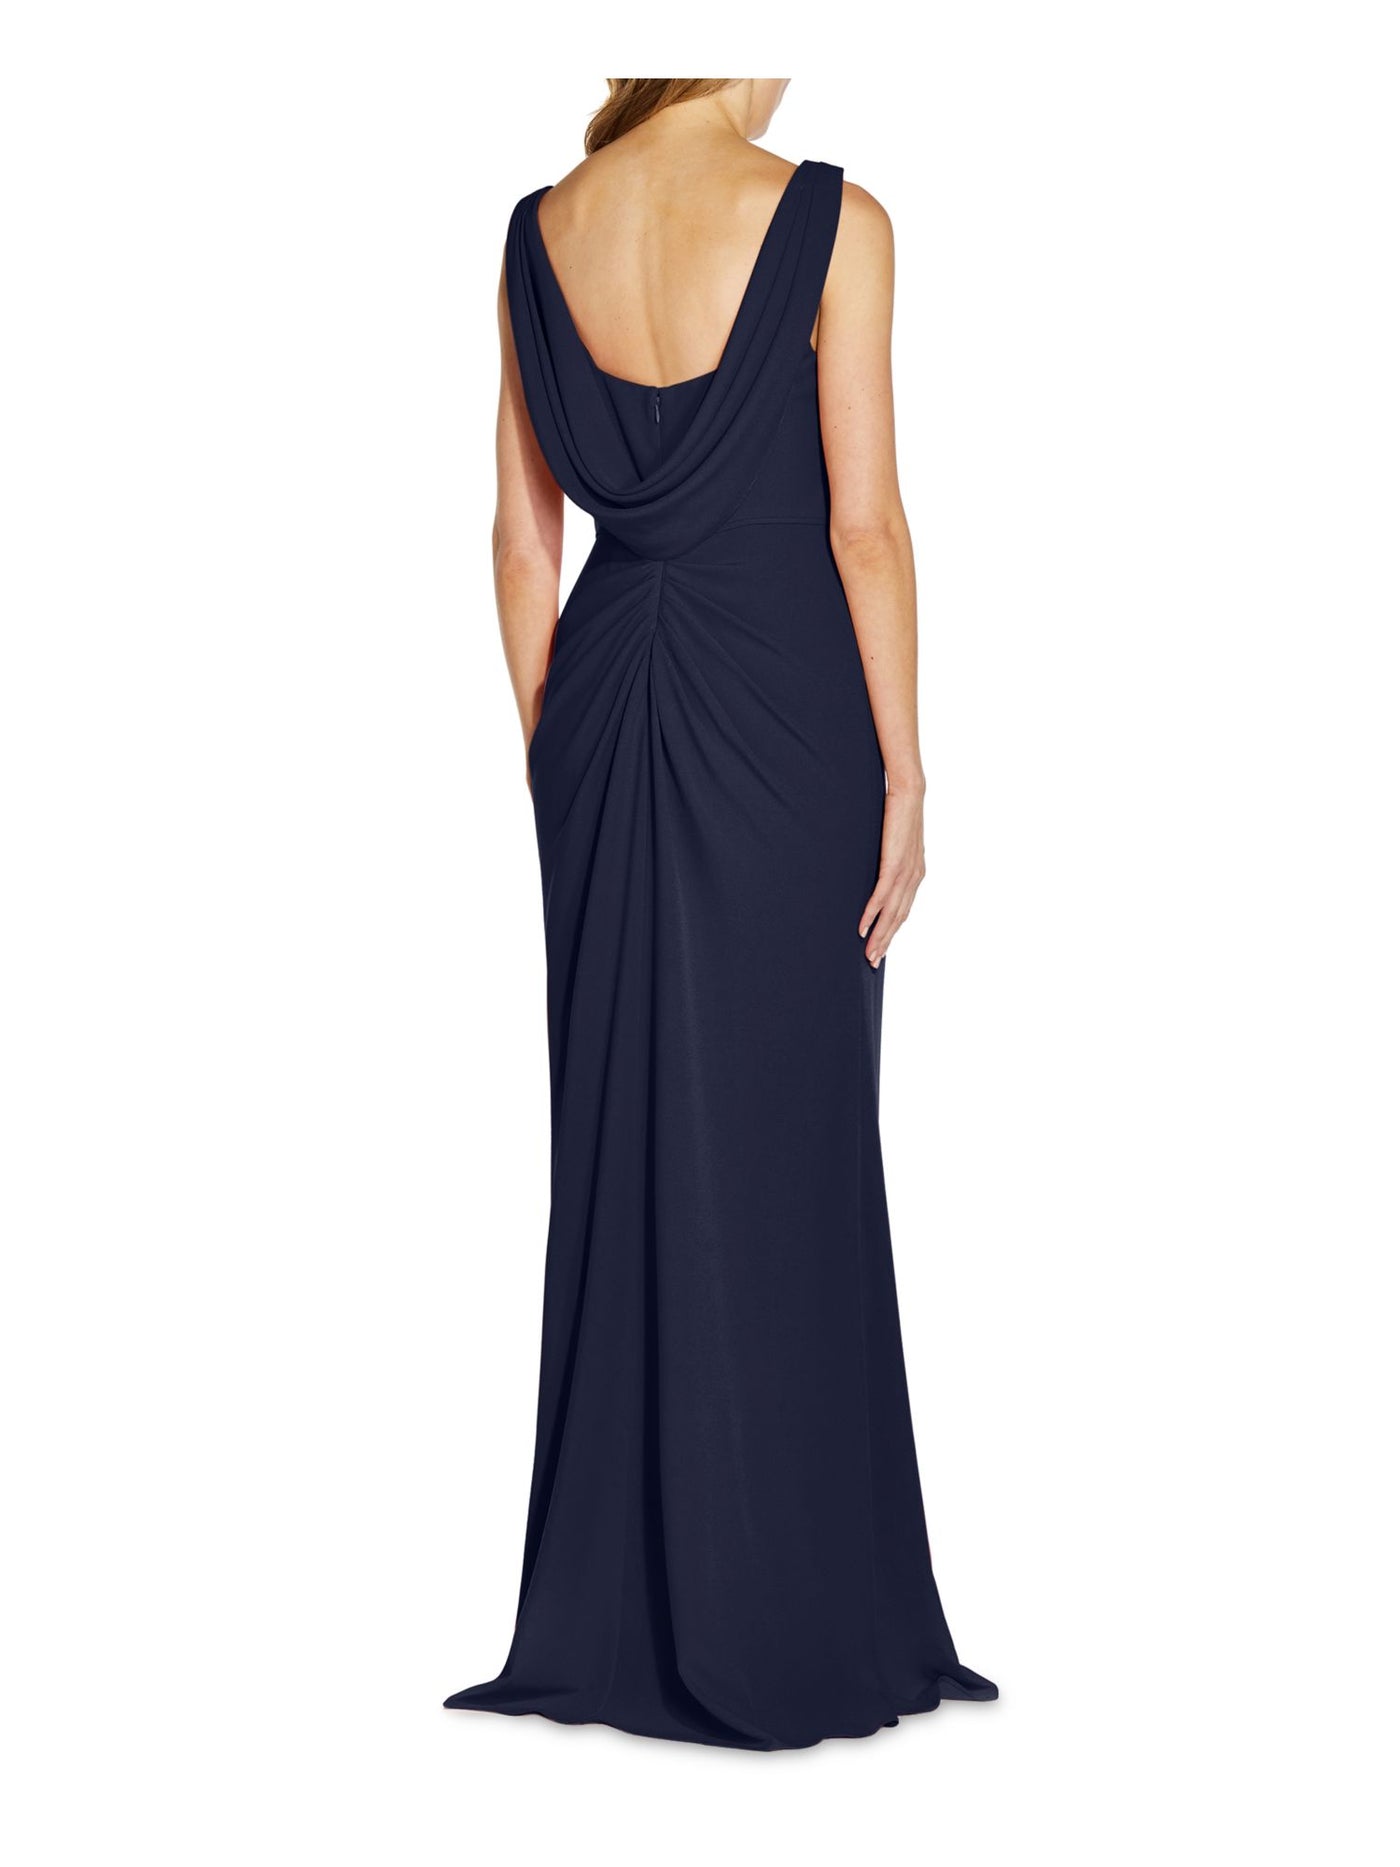 ADRIANNA PAPELL Womens Navy Stretch Pleated Zippered Drape Back Sleeveless Full-Length Formal Gown Dress 18